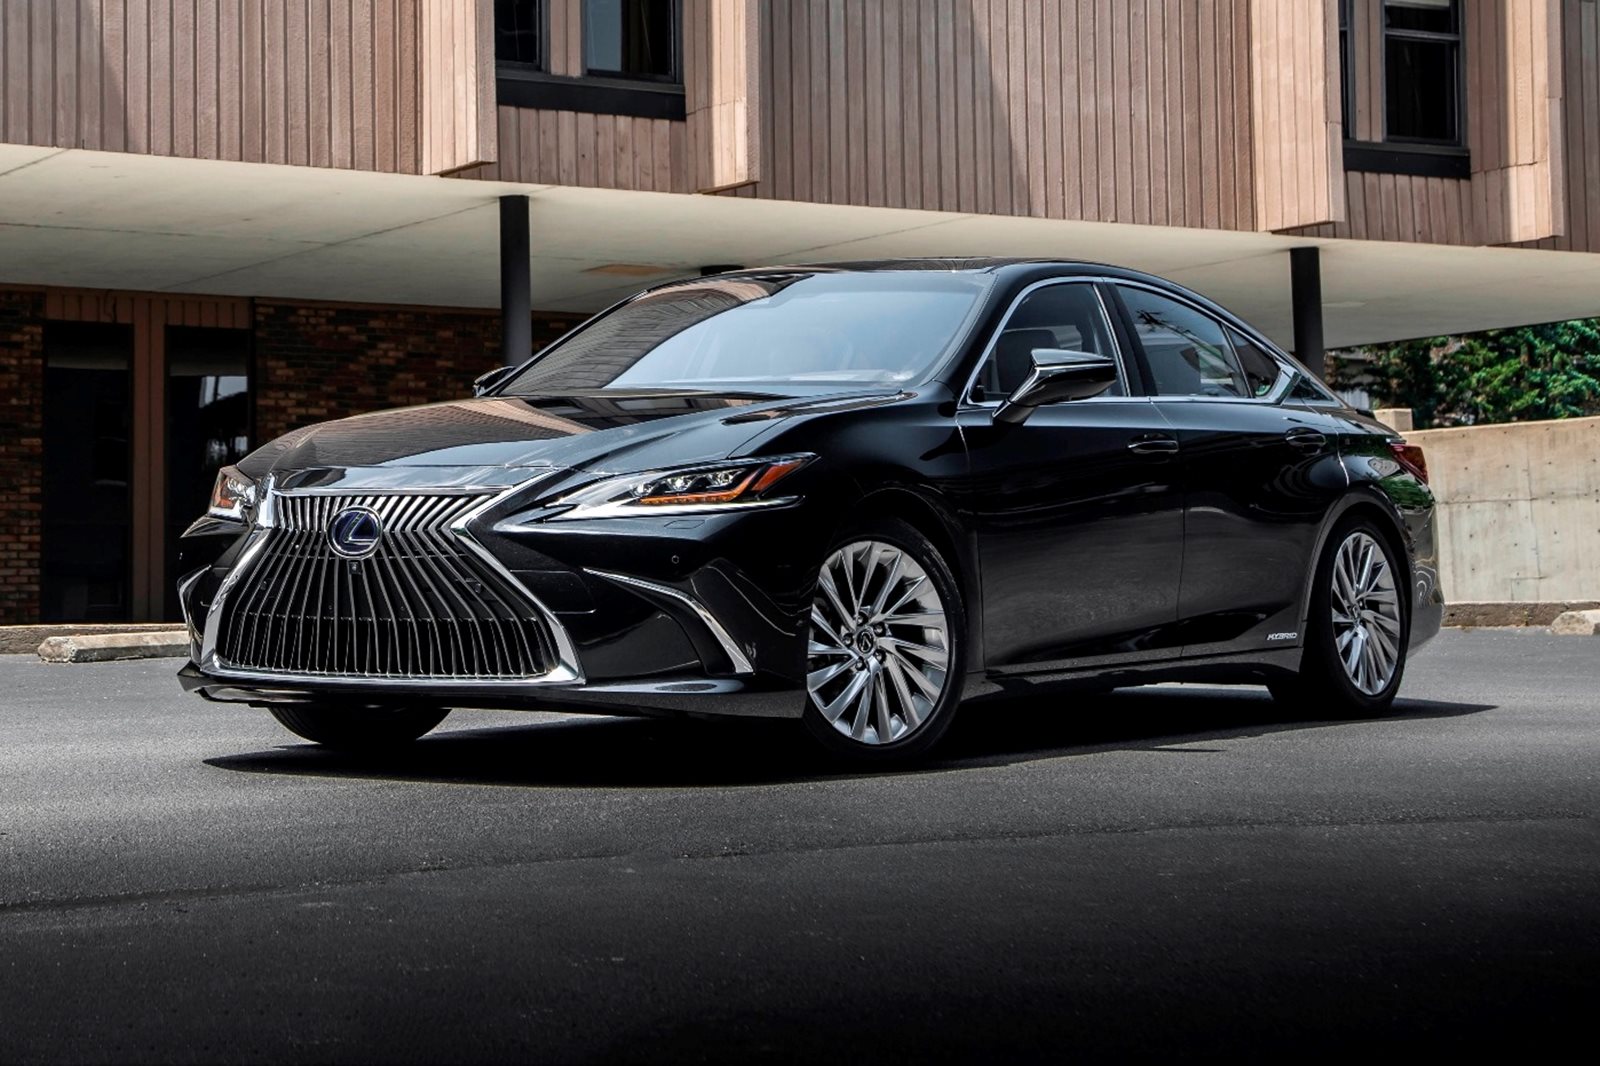 2019 Lexus ES Sedan First Drive Review Revamped And Ready